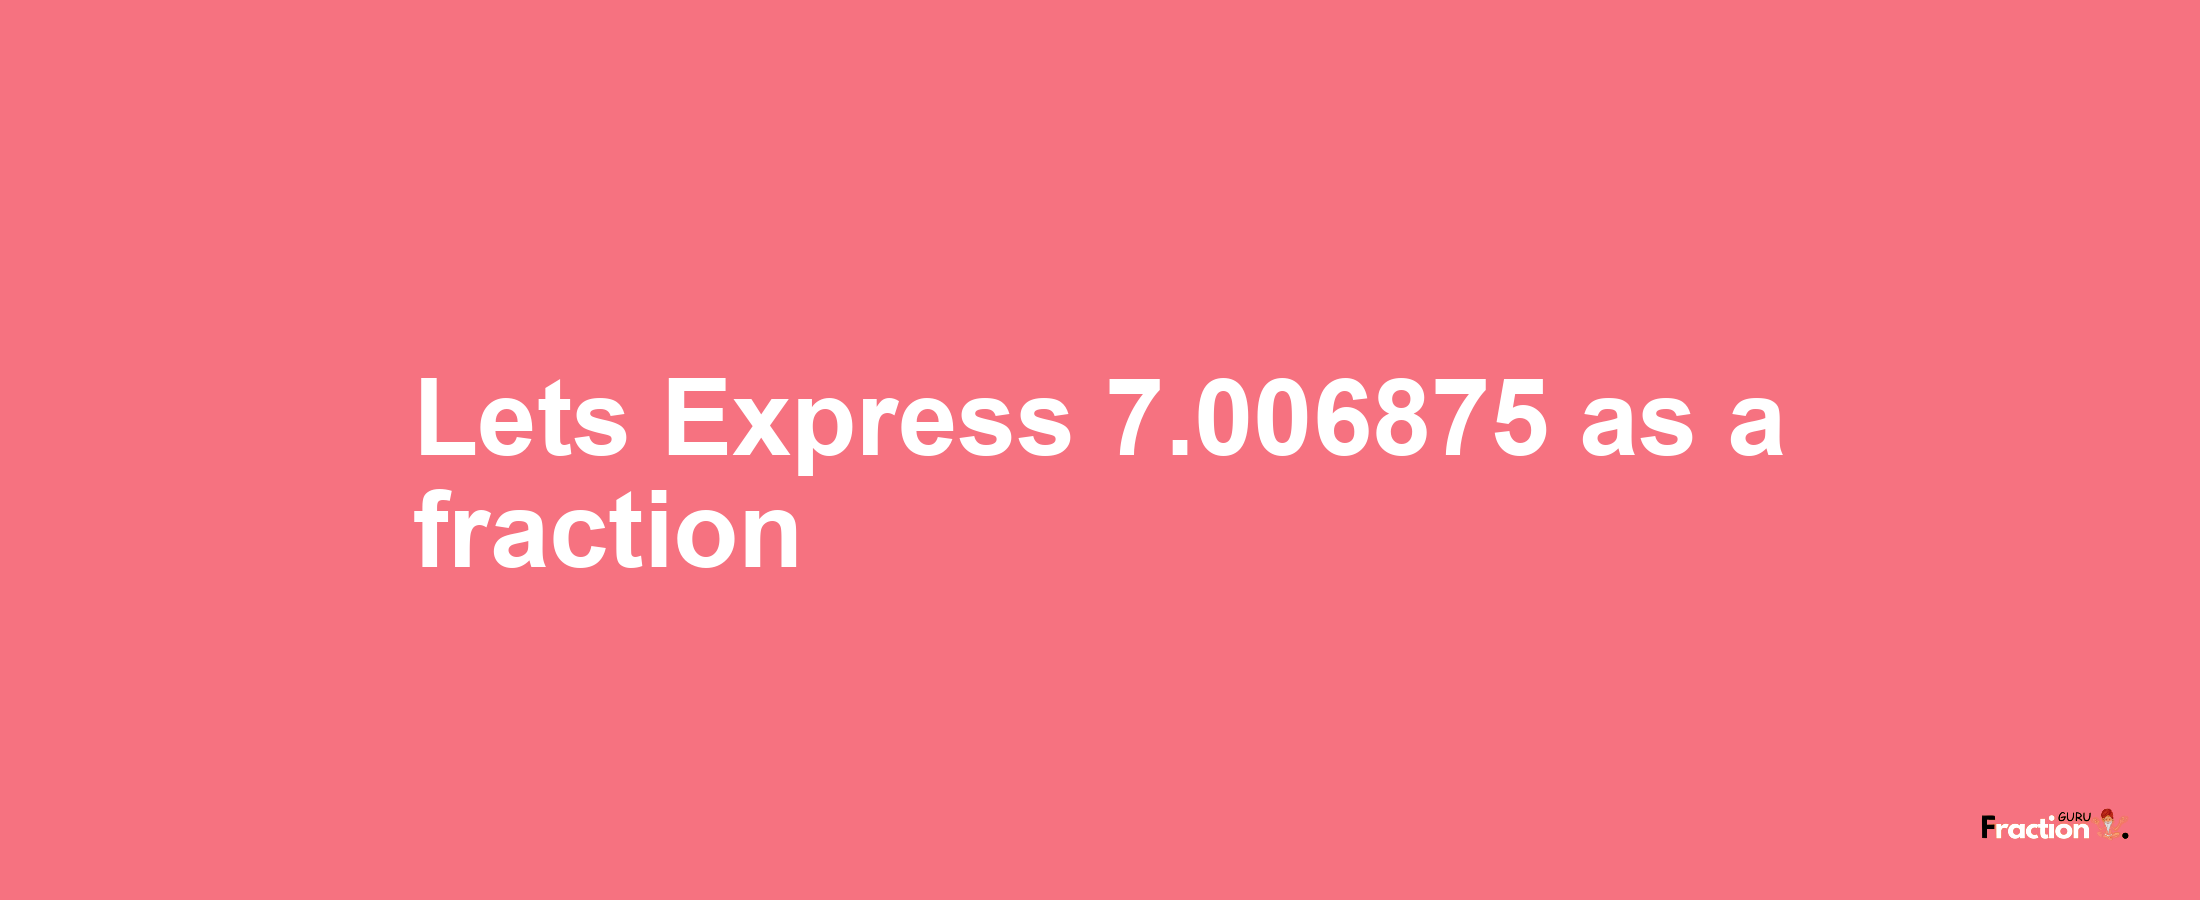 Lets Express 7.006875 as afraction